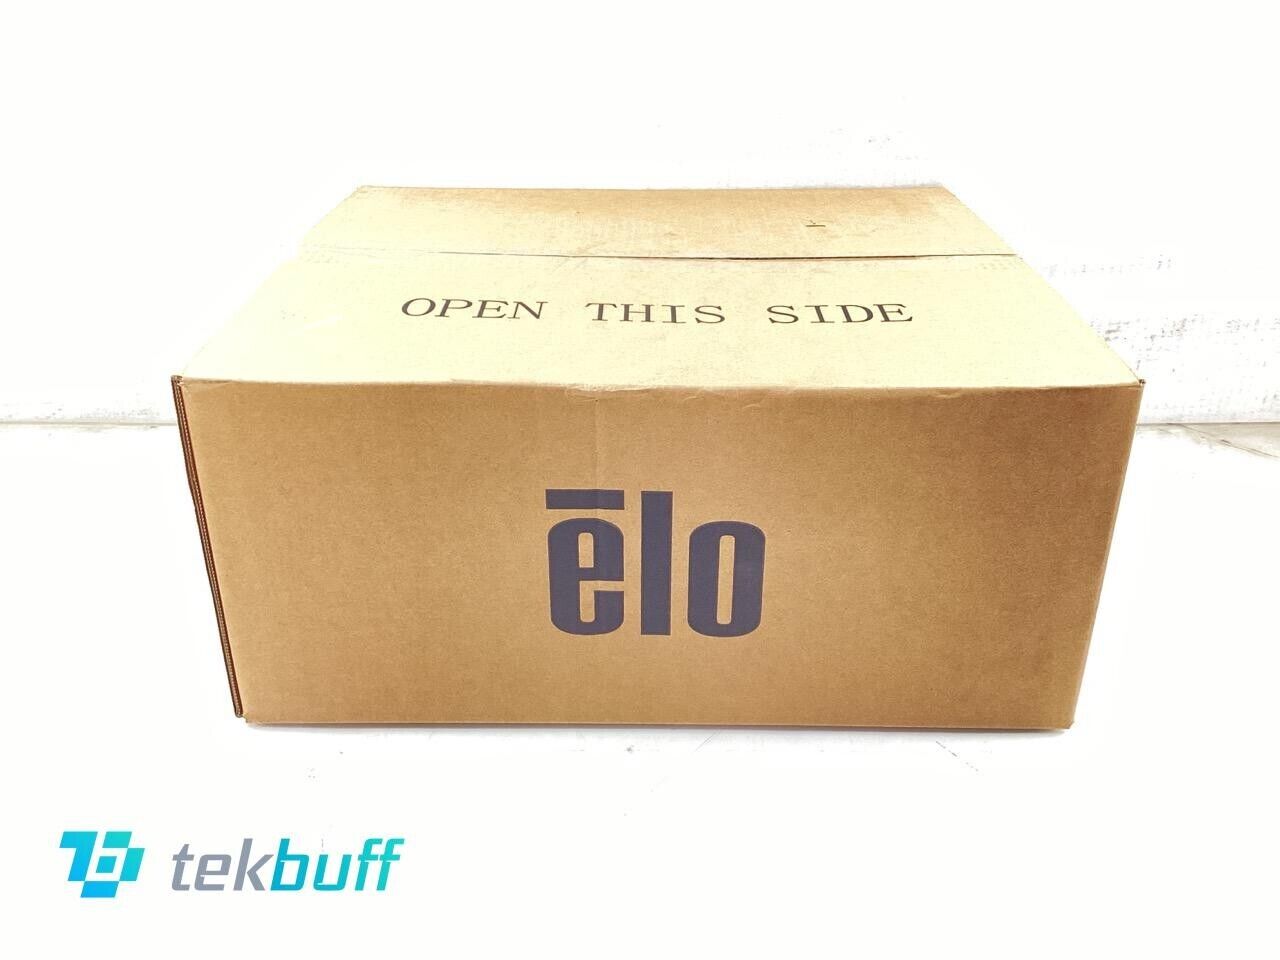 Elo Touch 1723L 17